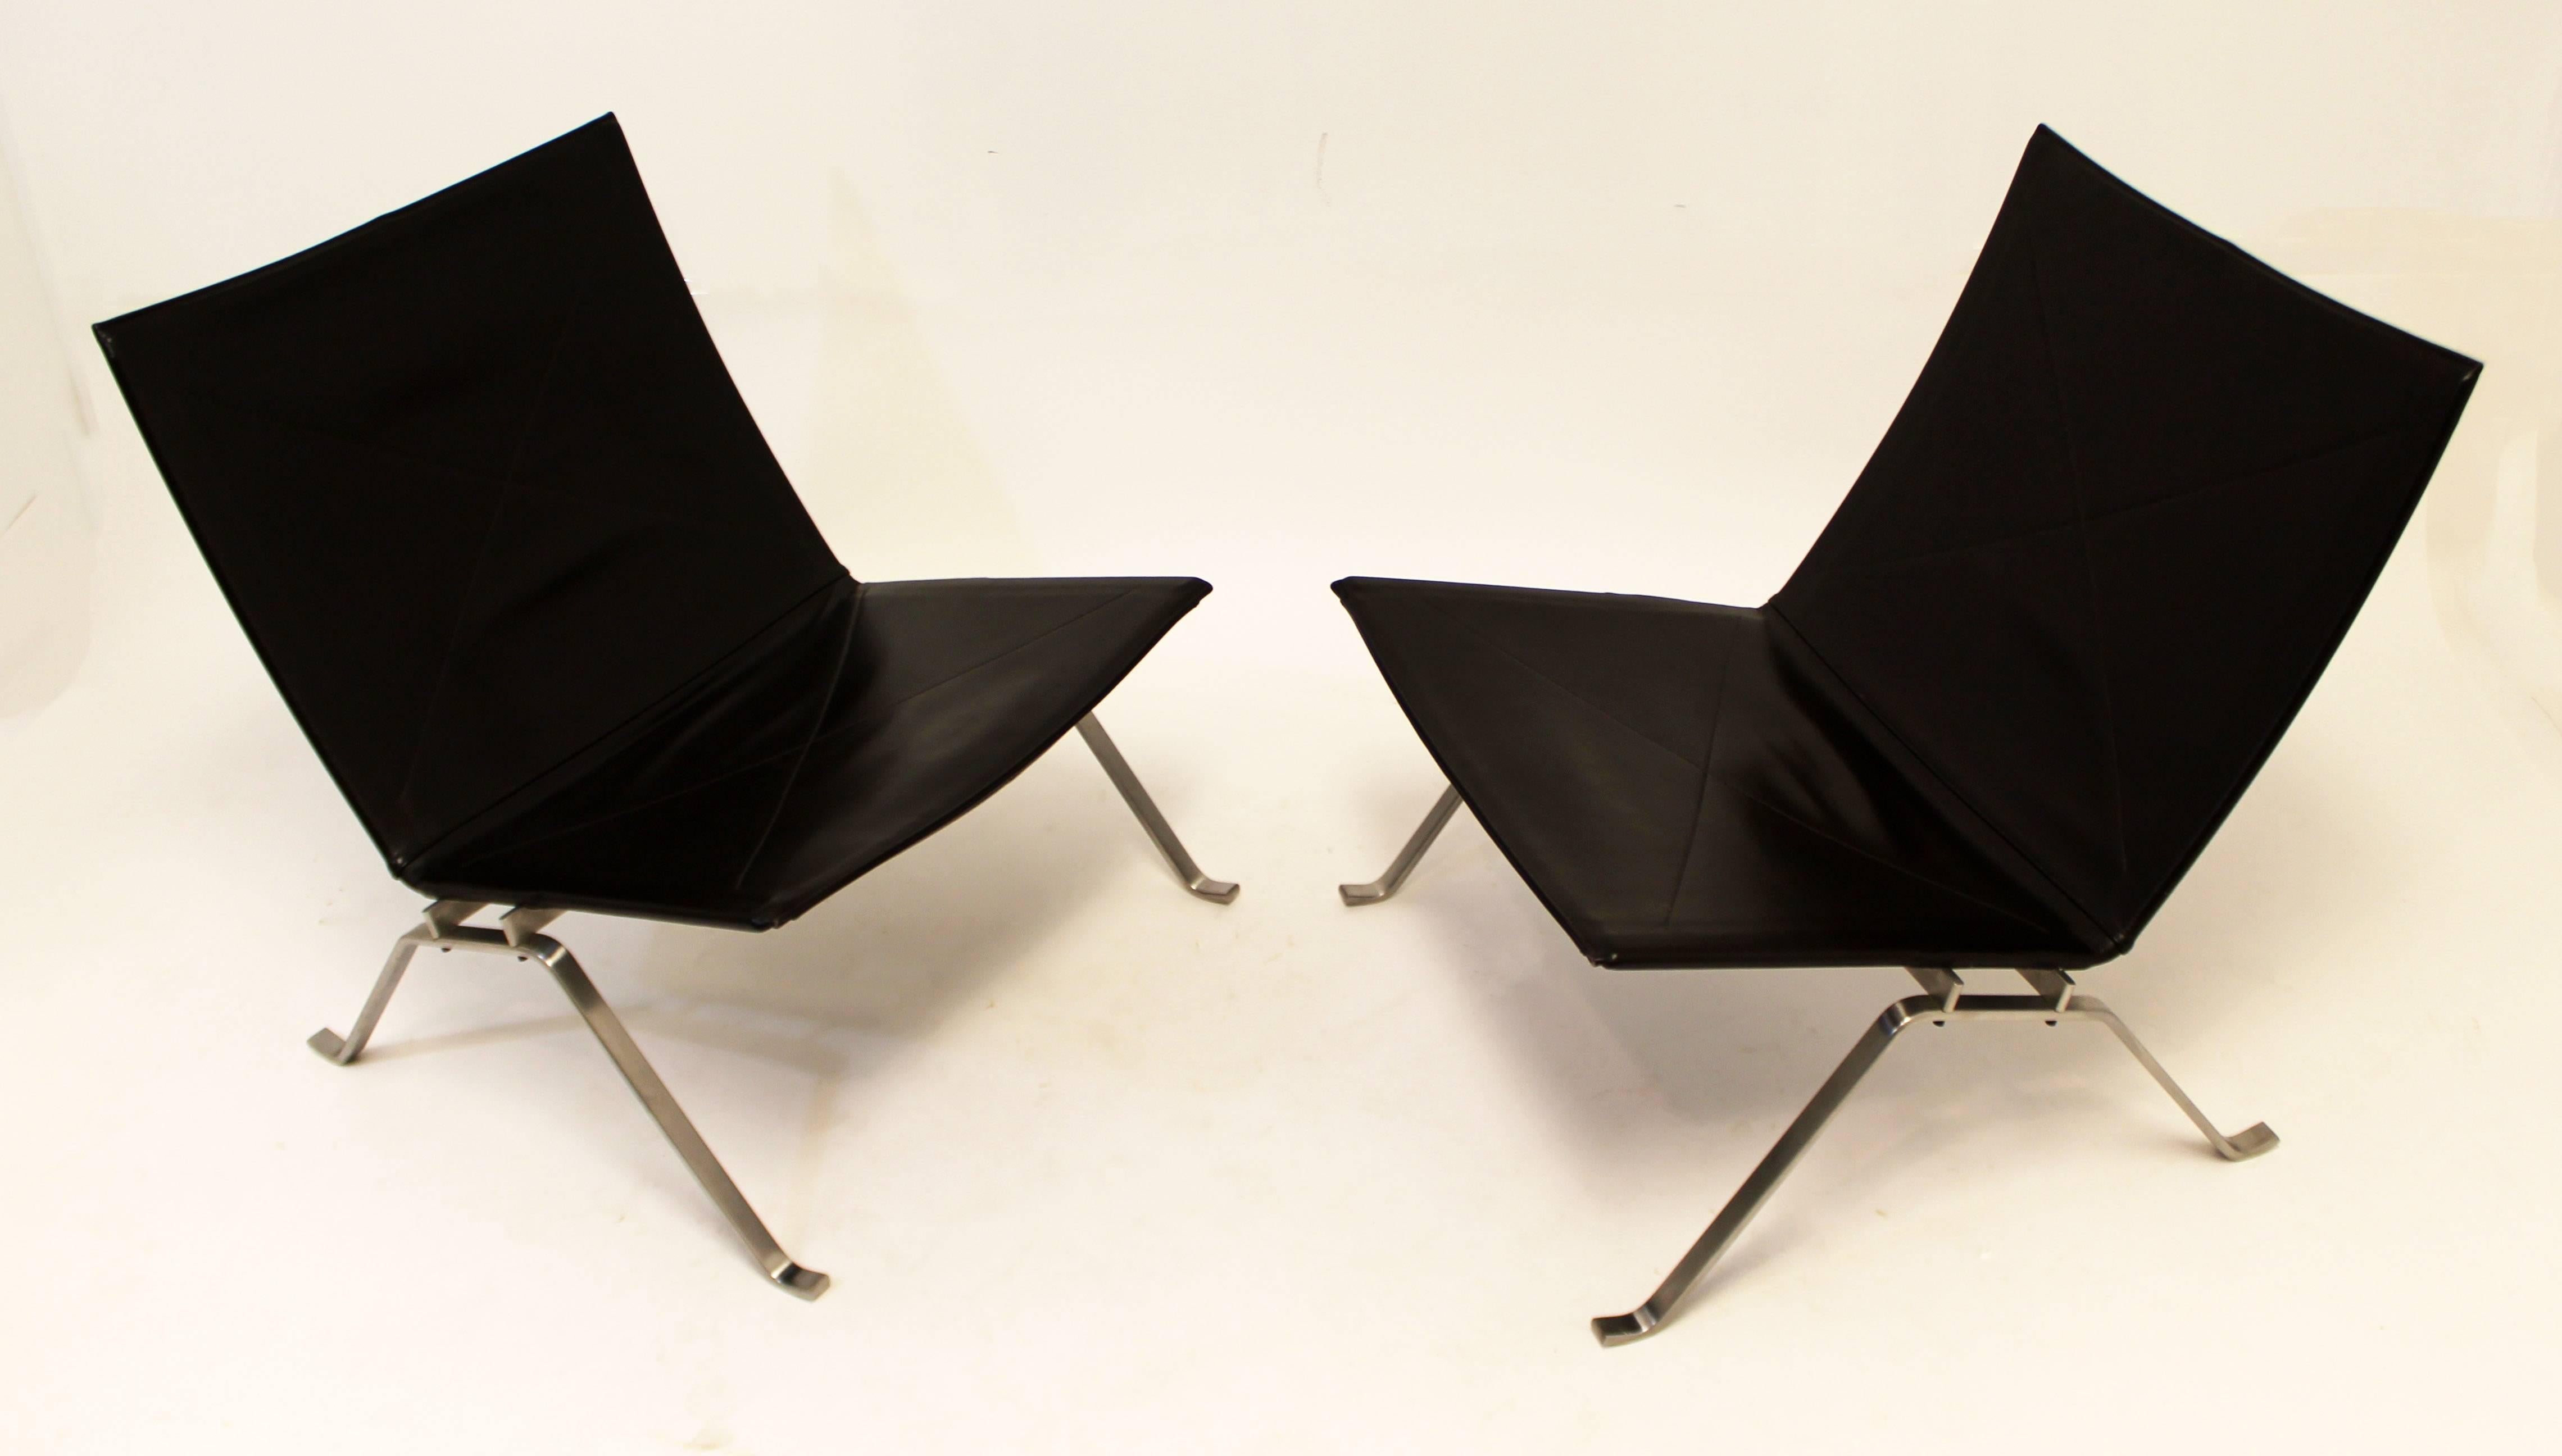 Poul Kjaerholm PK22 for Fritz Hansen lounge chairs. These original signed PK22 chairs have the original label on bottom. The color of the leather is dark brown.